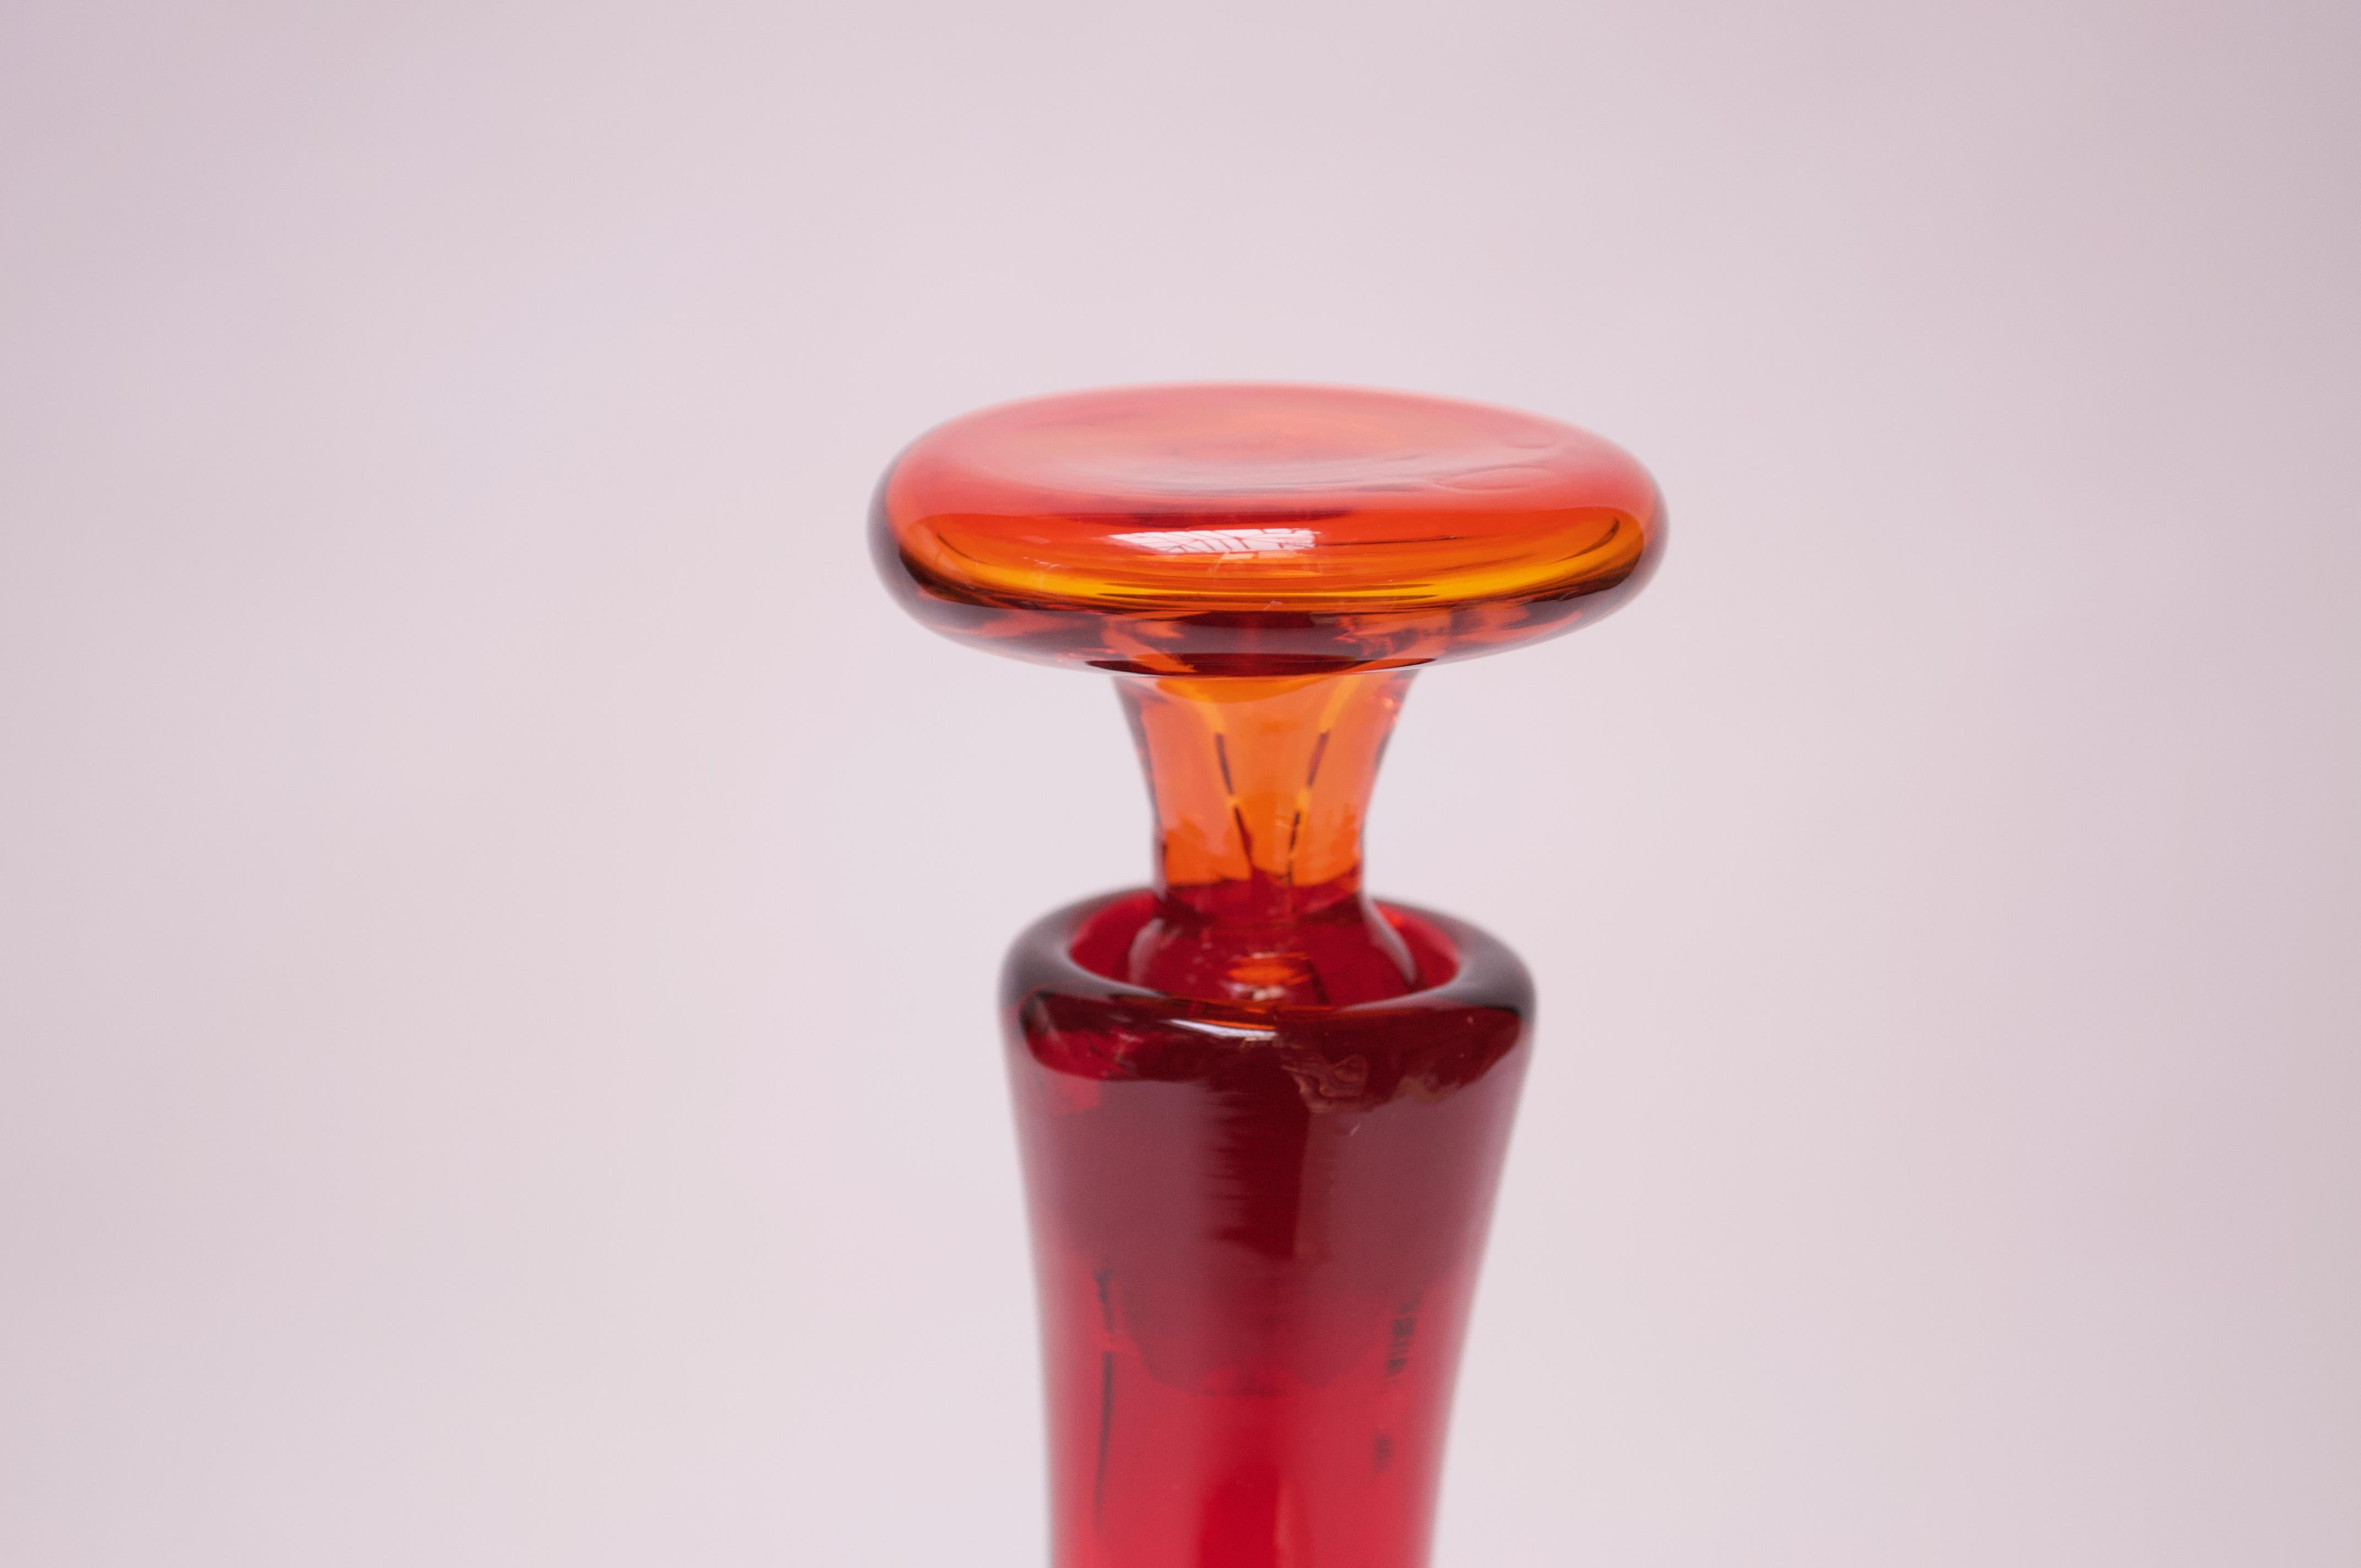 Mid-20th Century Blown Glass Amberina Decanter with Stopper by Wayne Husted for Blenko